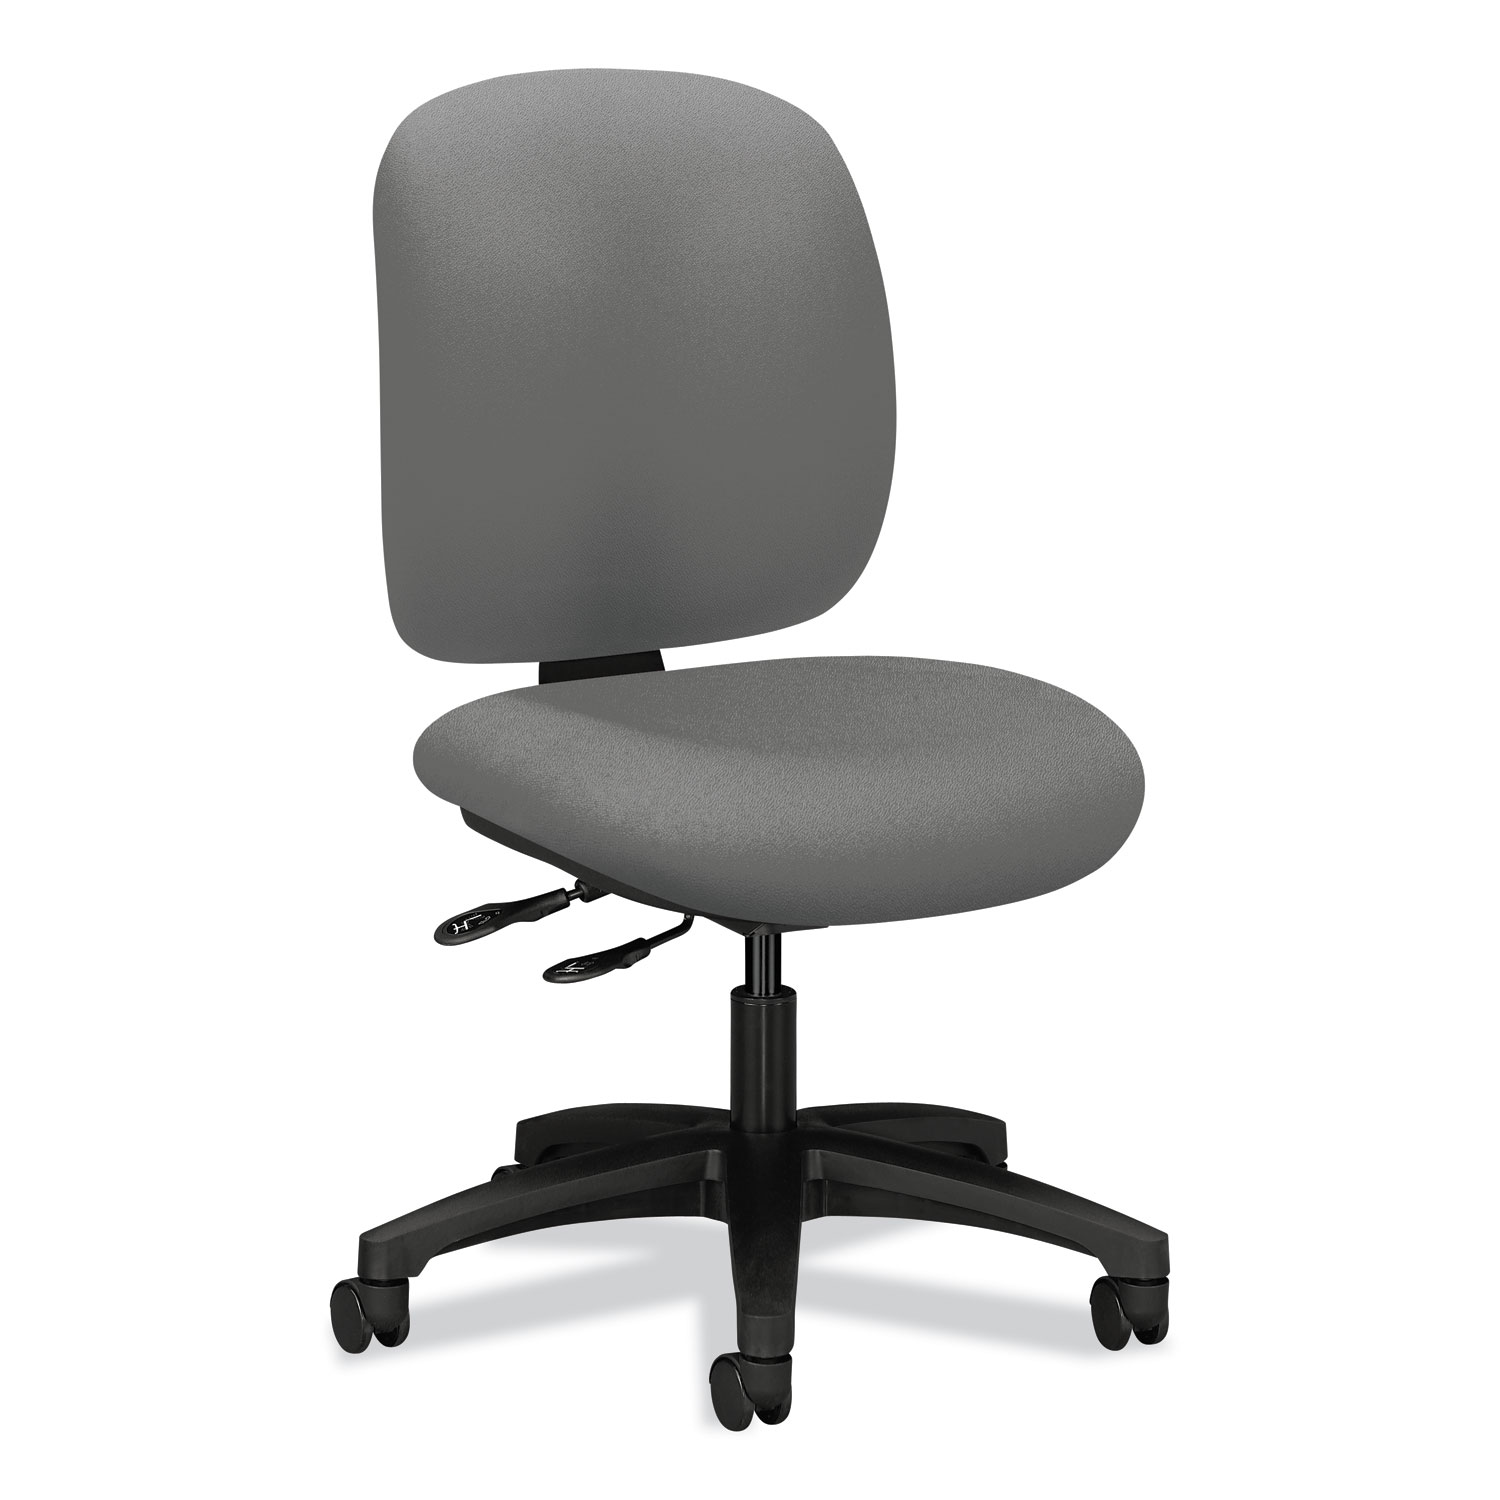  HON HON5903CU22T ComforTask Task Chair, Supports up to 300 lbs, Frost Seat, Frost Back, Black Base (HON5903CU22T) 